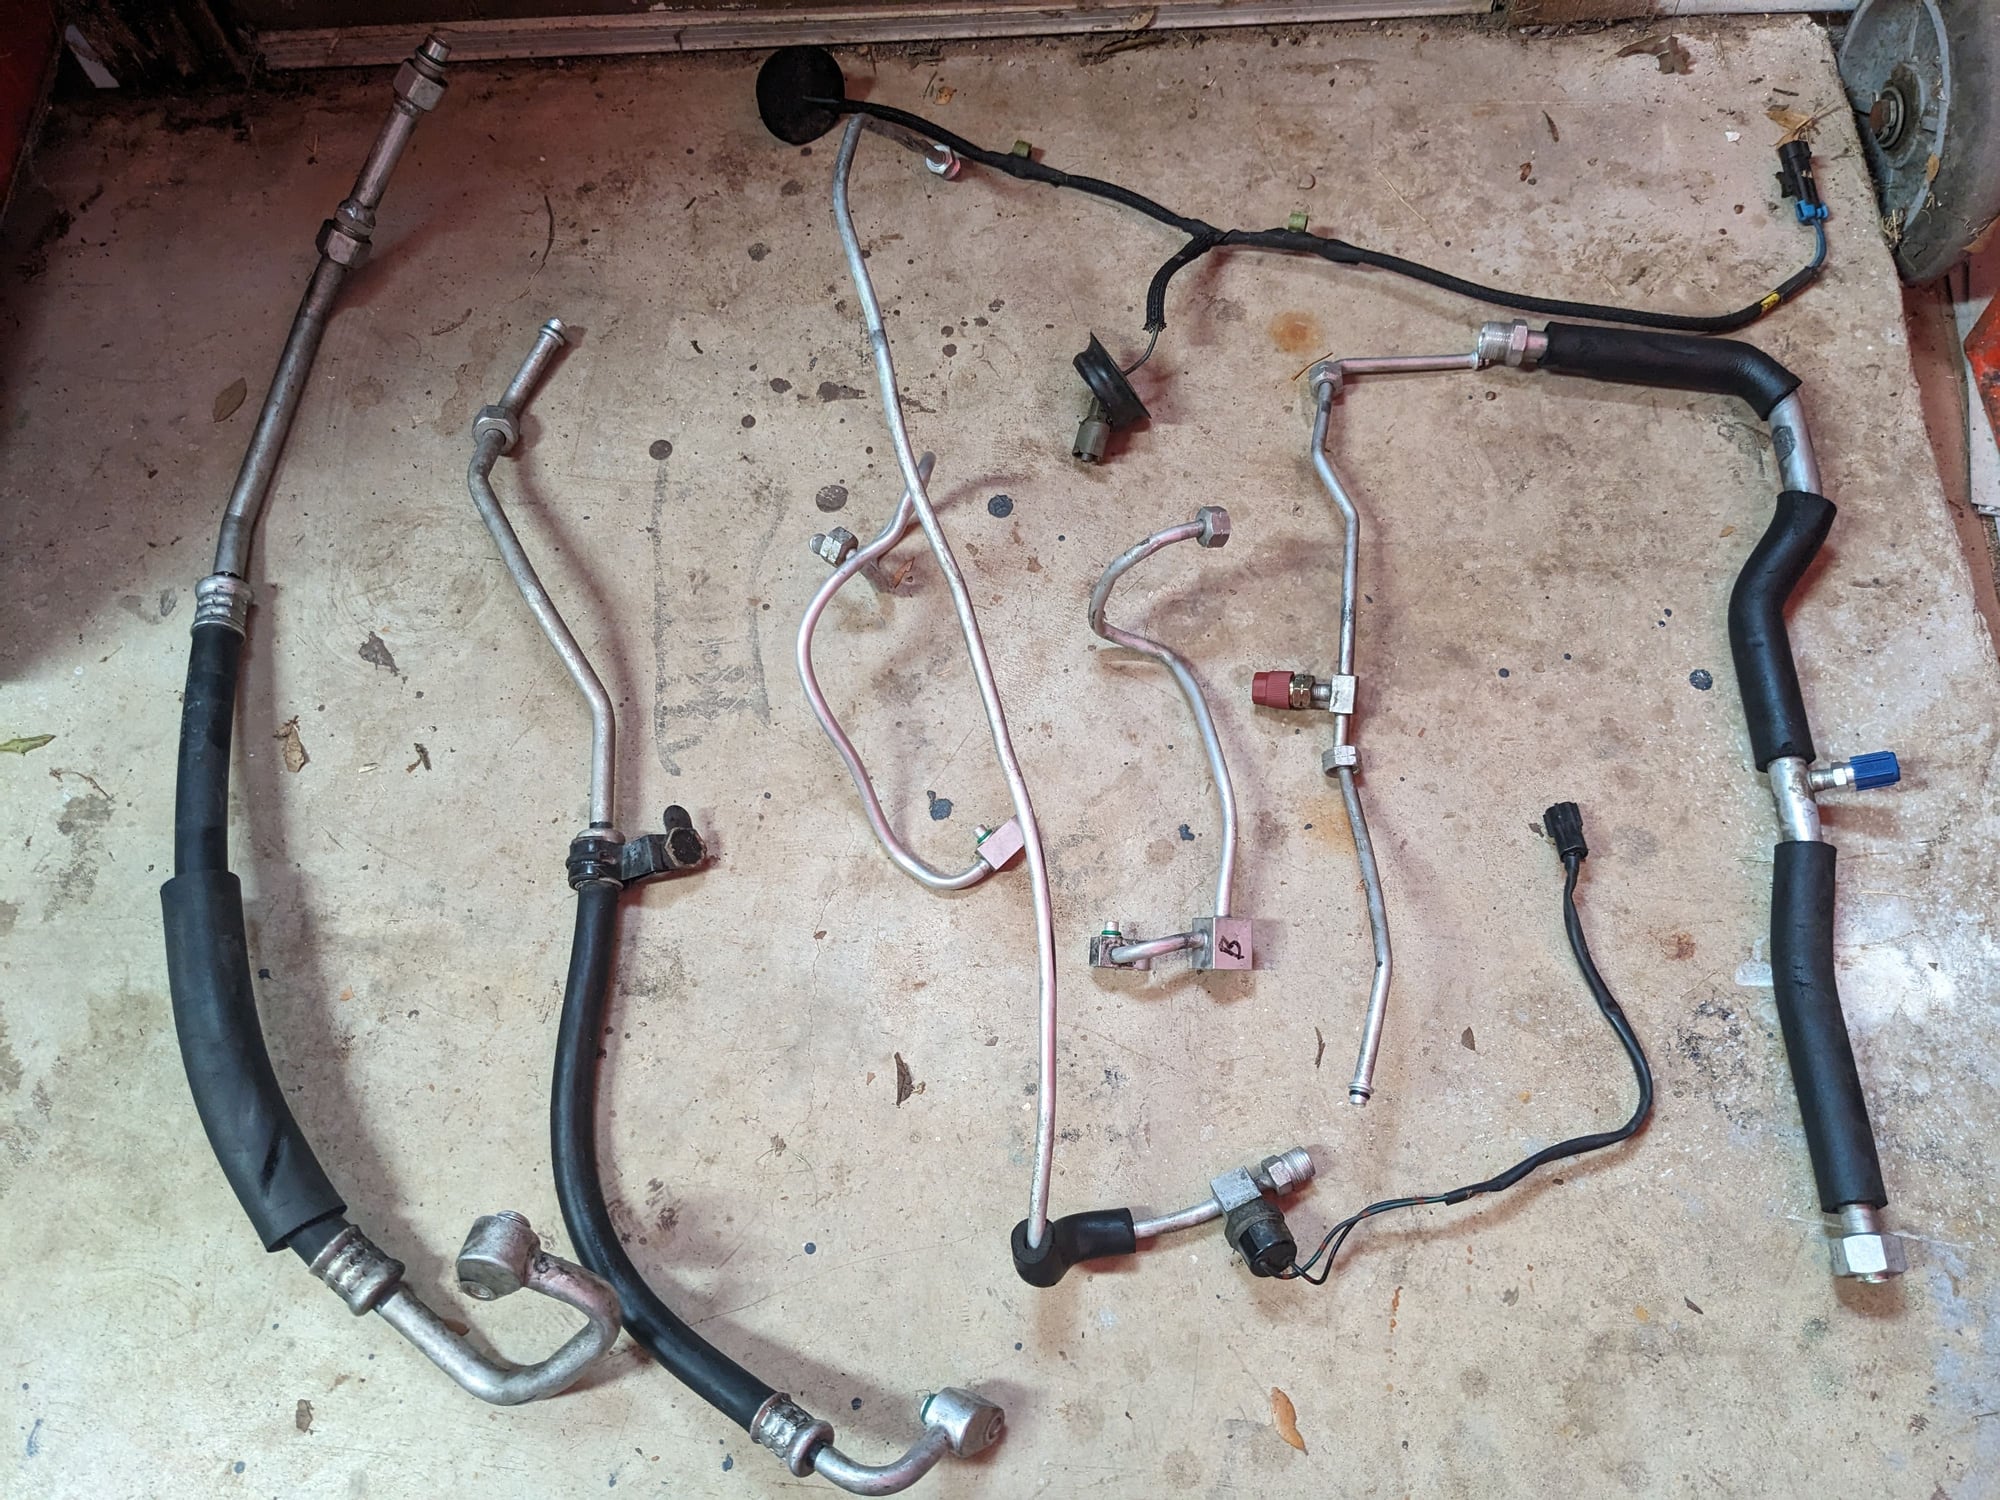 Miscellaneous - FD MANA A/C Lines and Condensor - Used - 1993 to 1995 Mazda RX-7 - Austin, TX 78759, United States